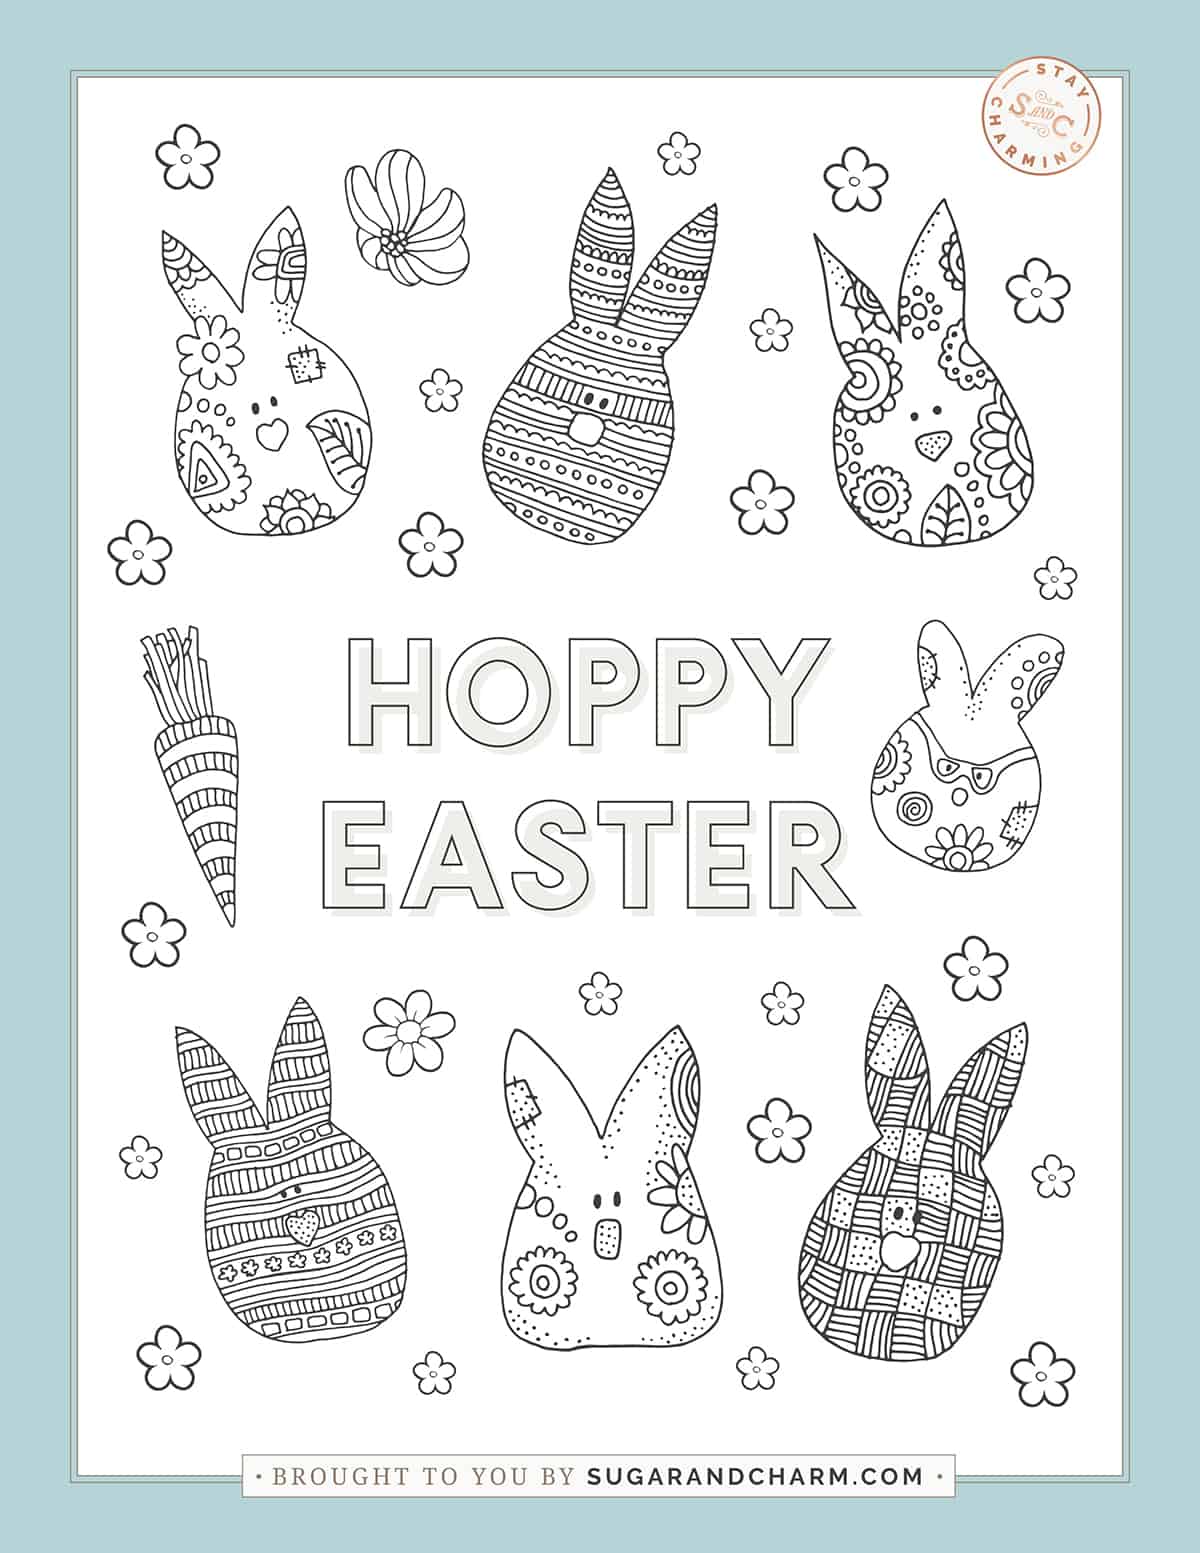 Easter bunny coloring sheet.